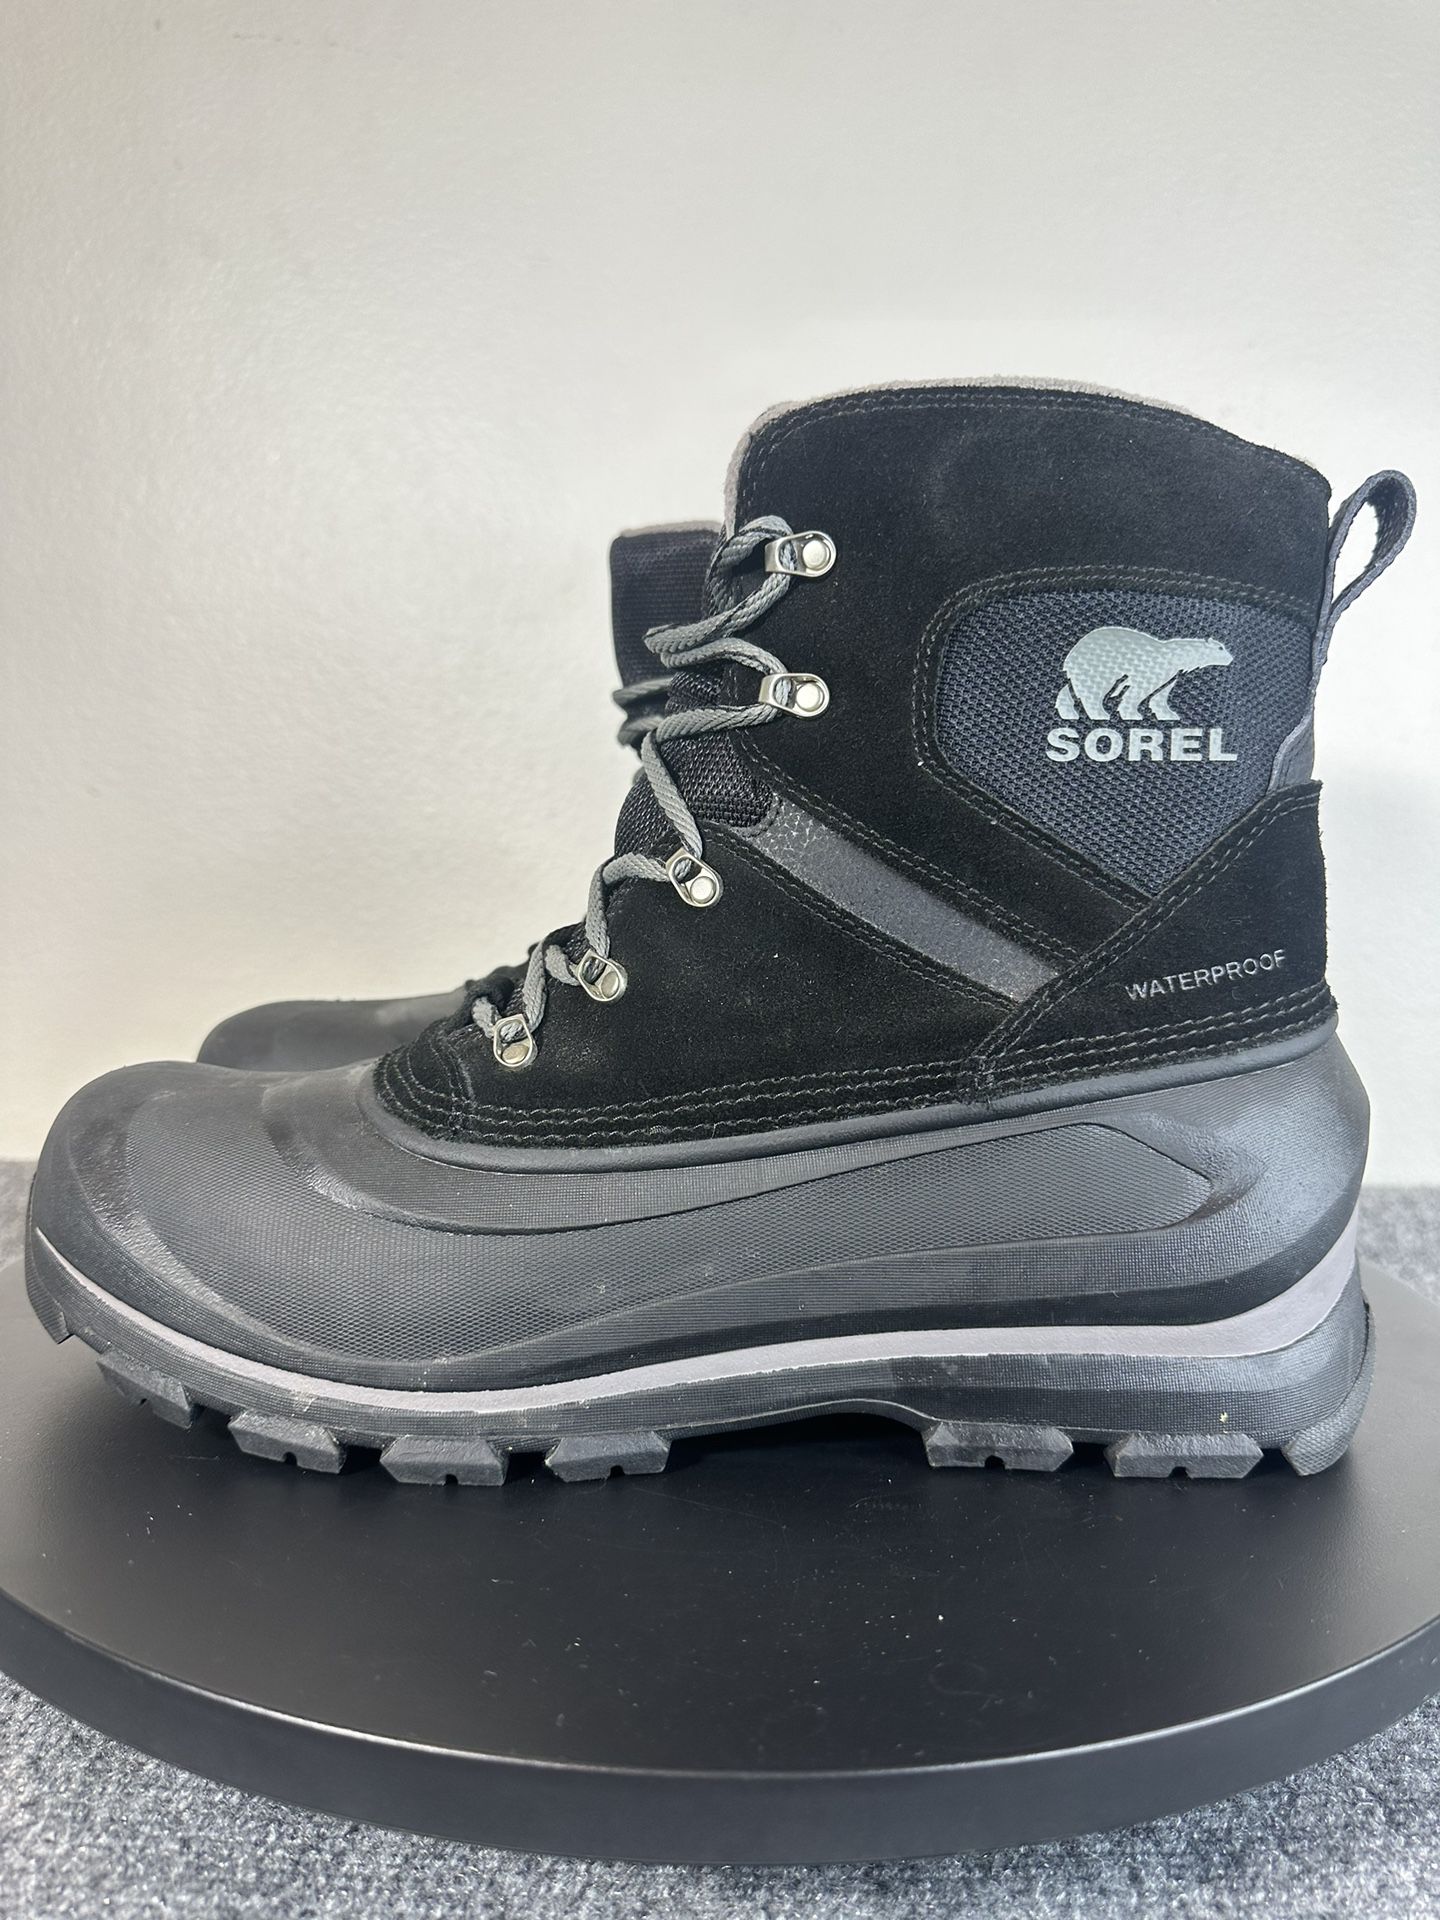 Mens Sorel BUXTON LACE UP HIGHTOP BOOTS Size 11 waterproof  